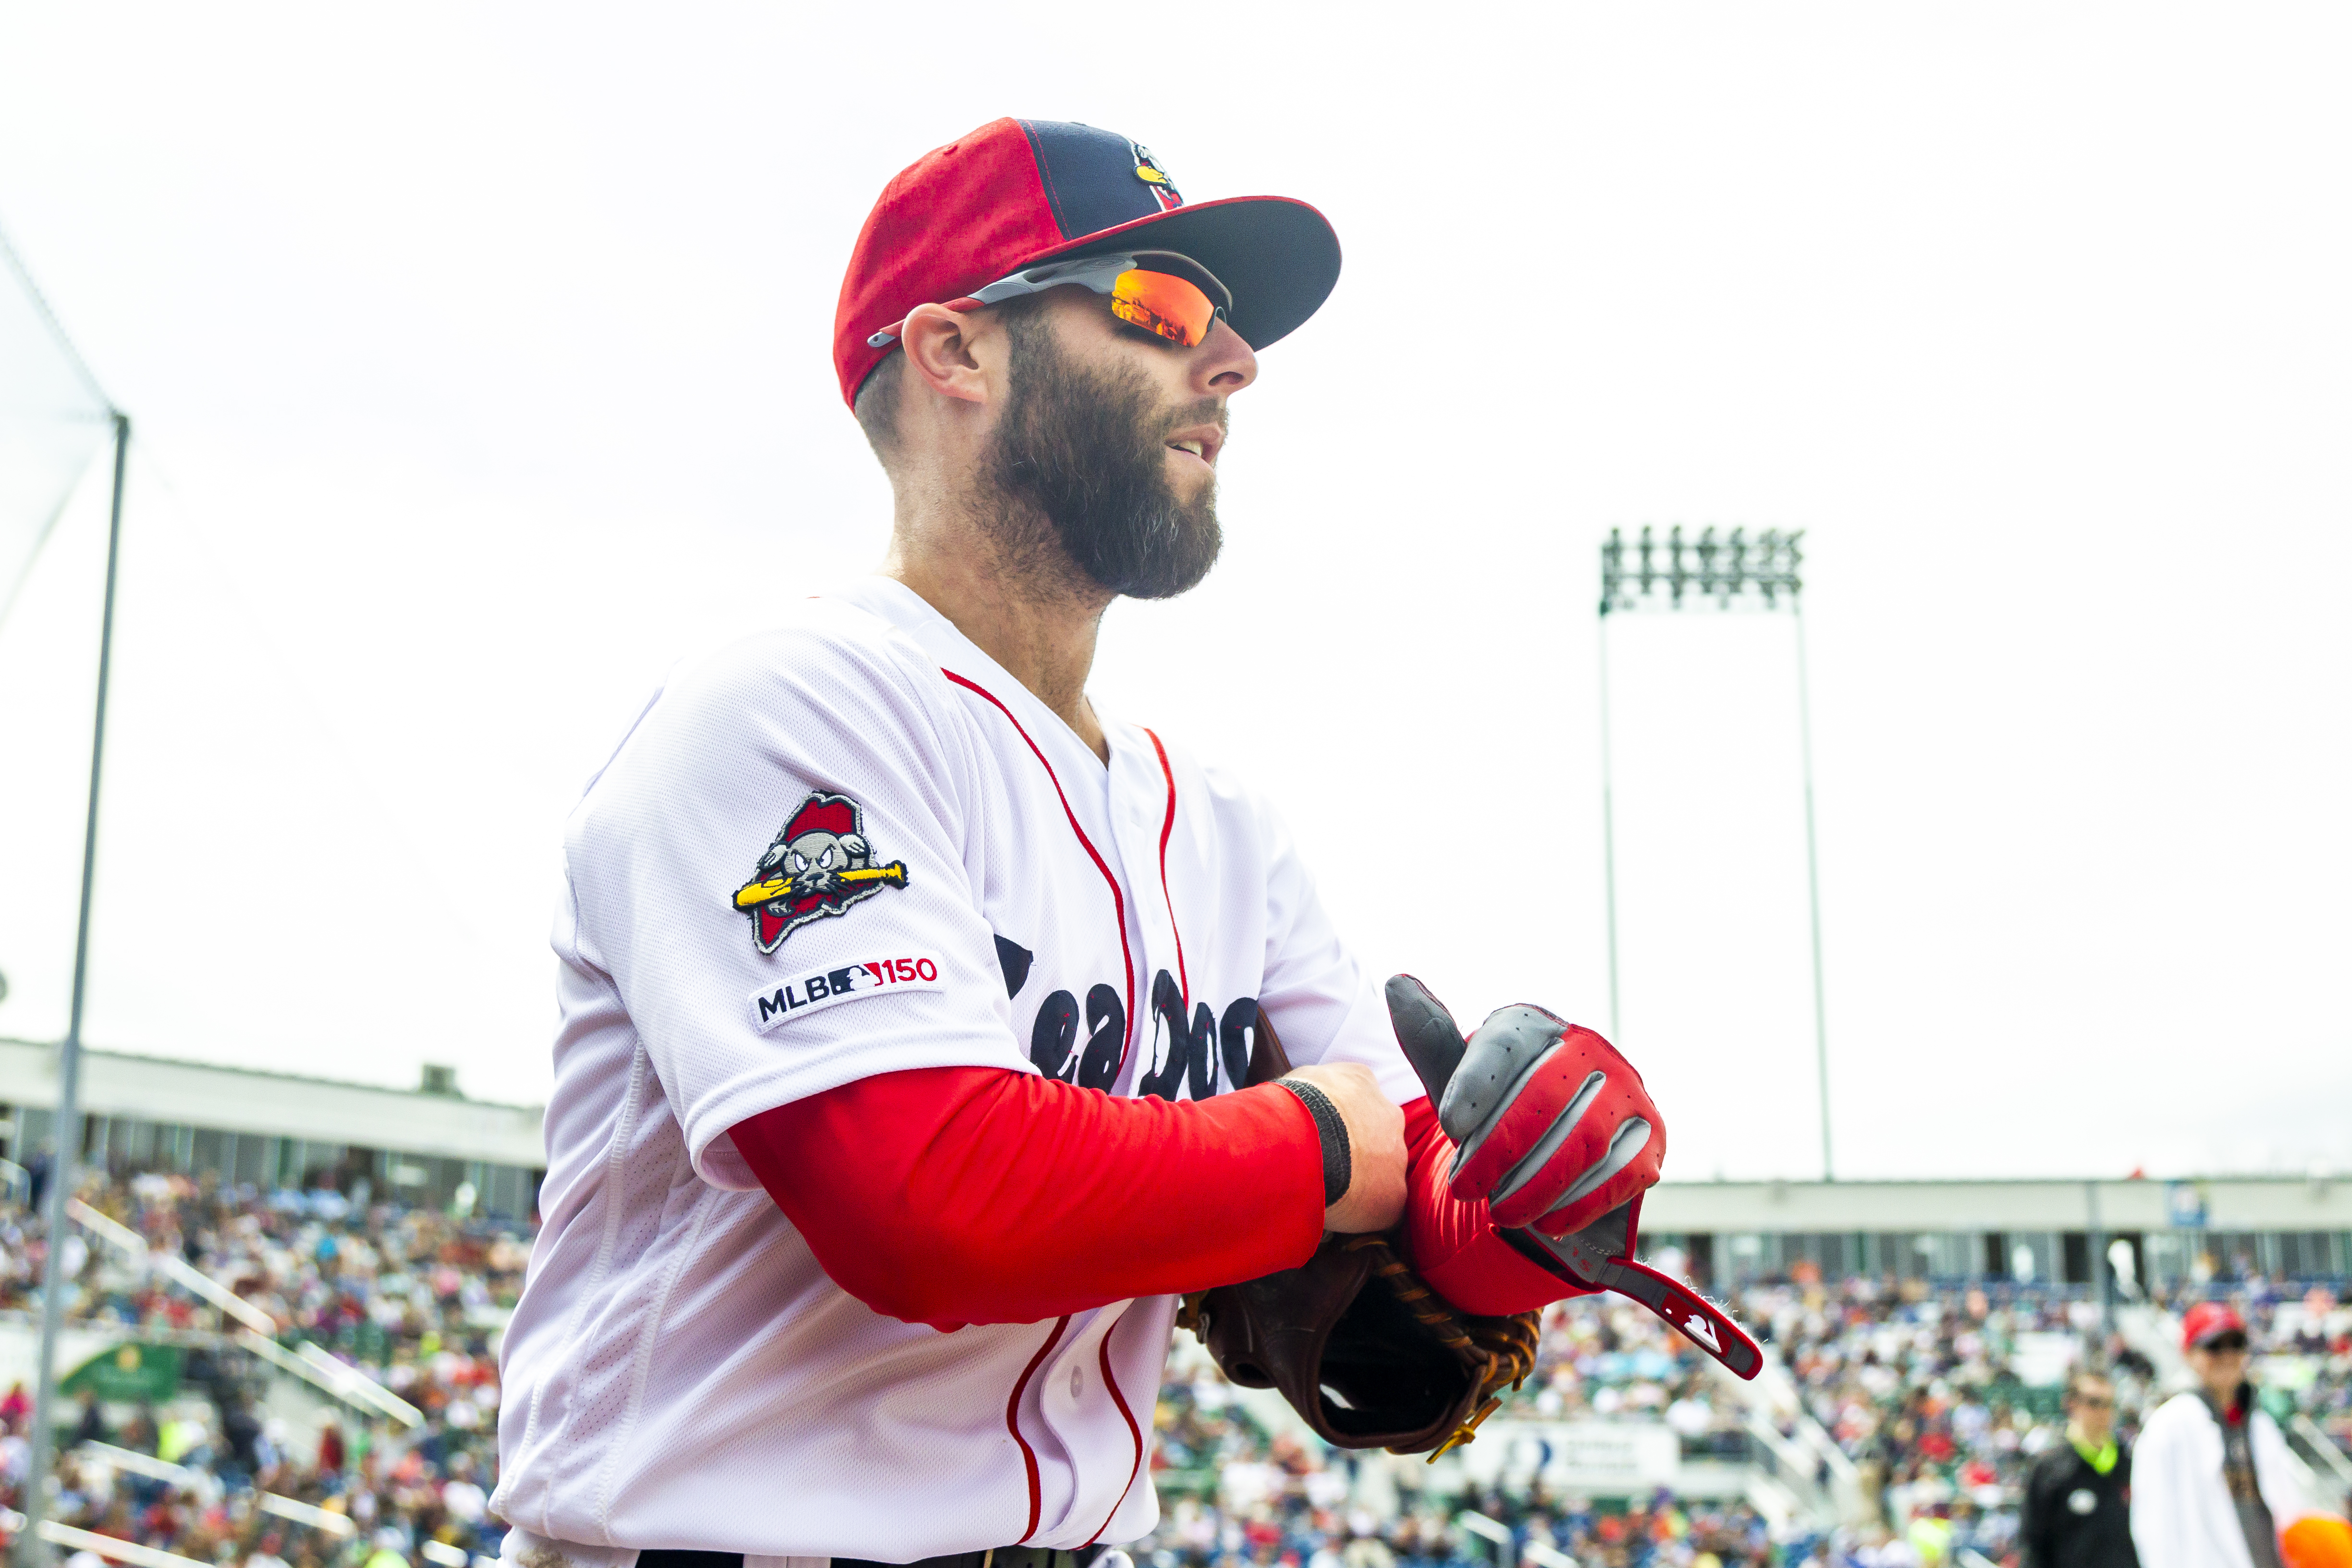 Dustin Pedroia kept striving to prove himself in minor leagues